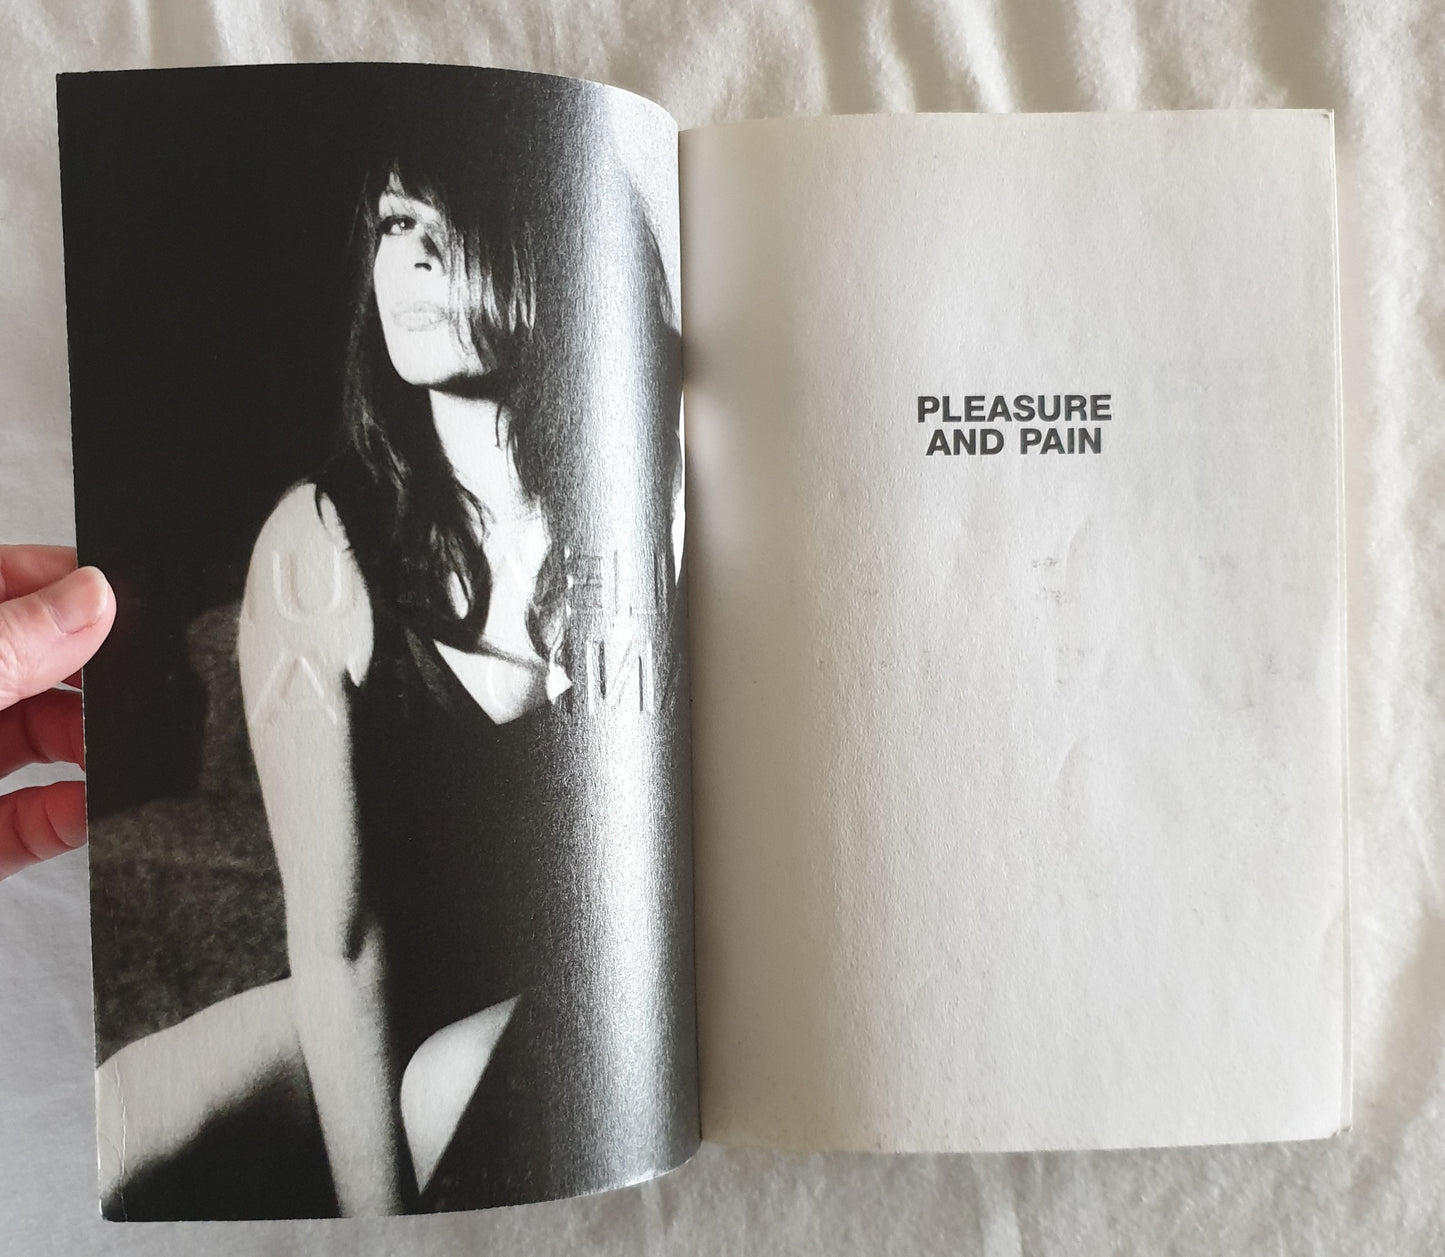 Pleasure and Pain by Chrissy Amphlett